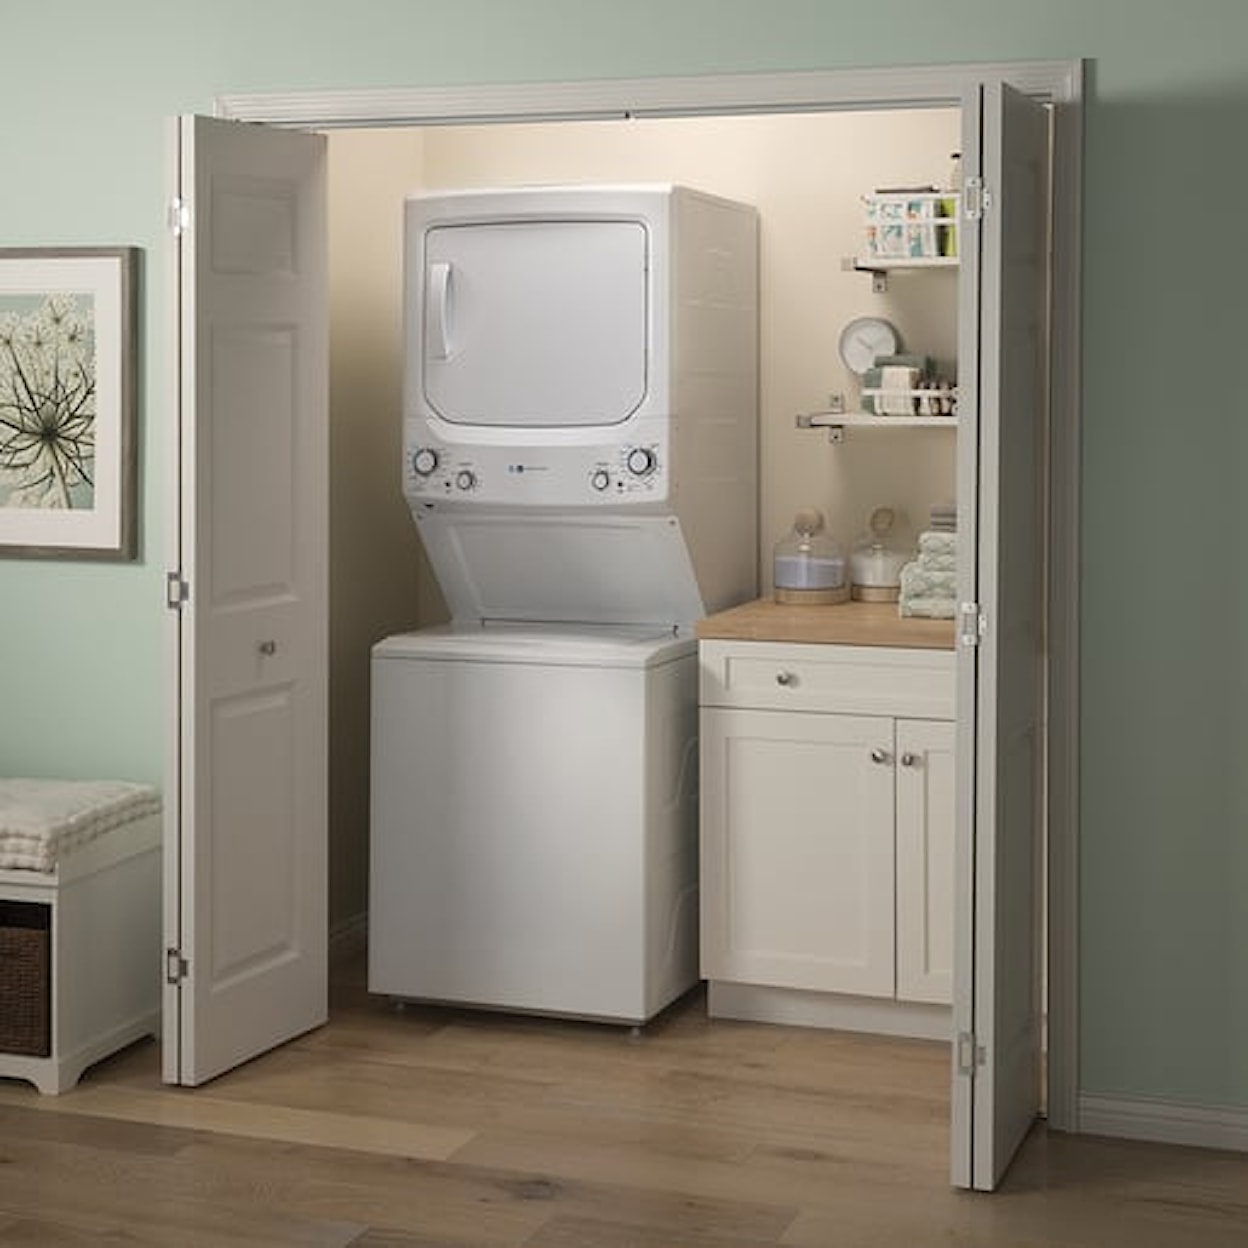 GE Appliances Washer/Dryer Combo Washer & Dryer